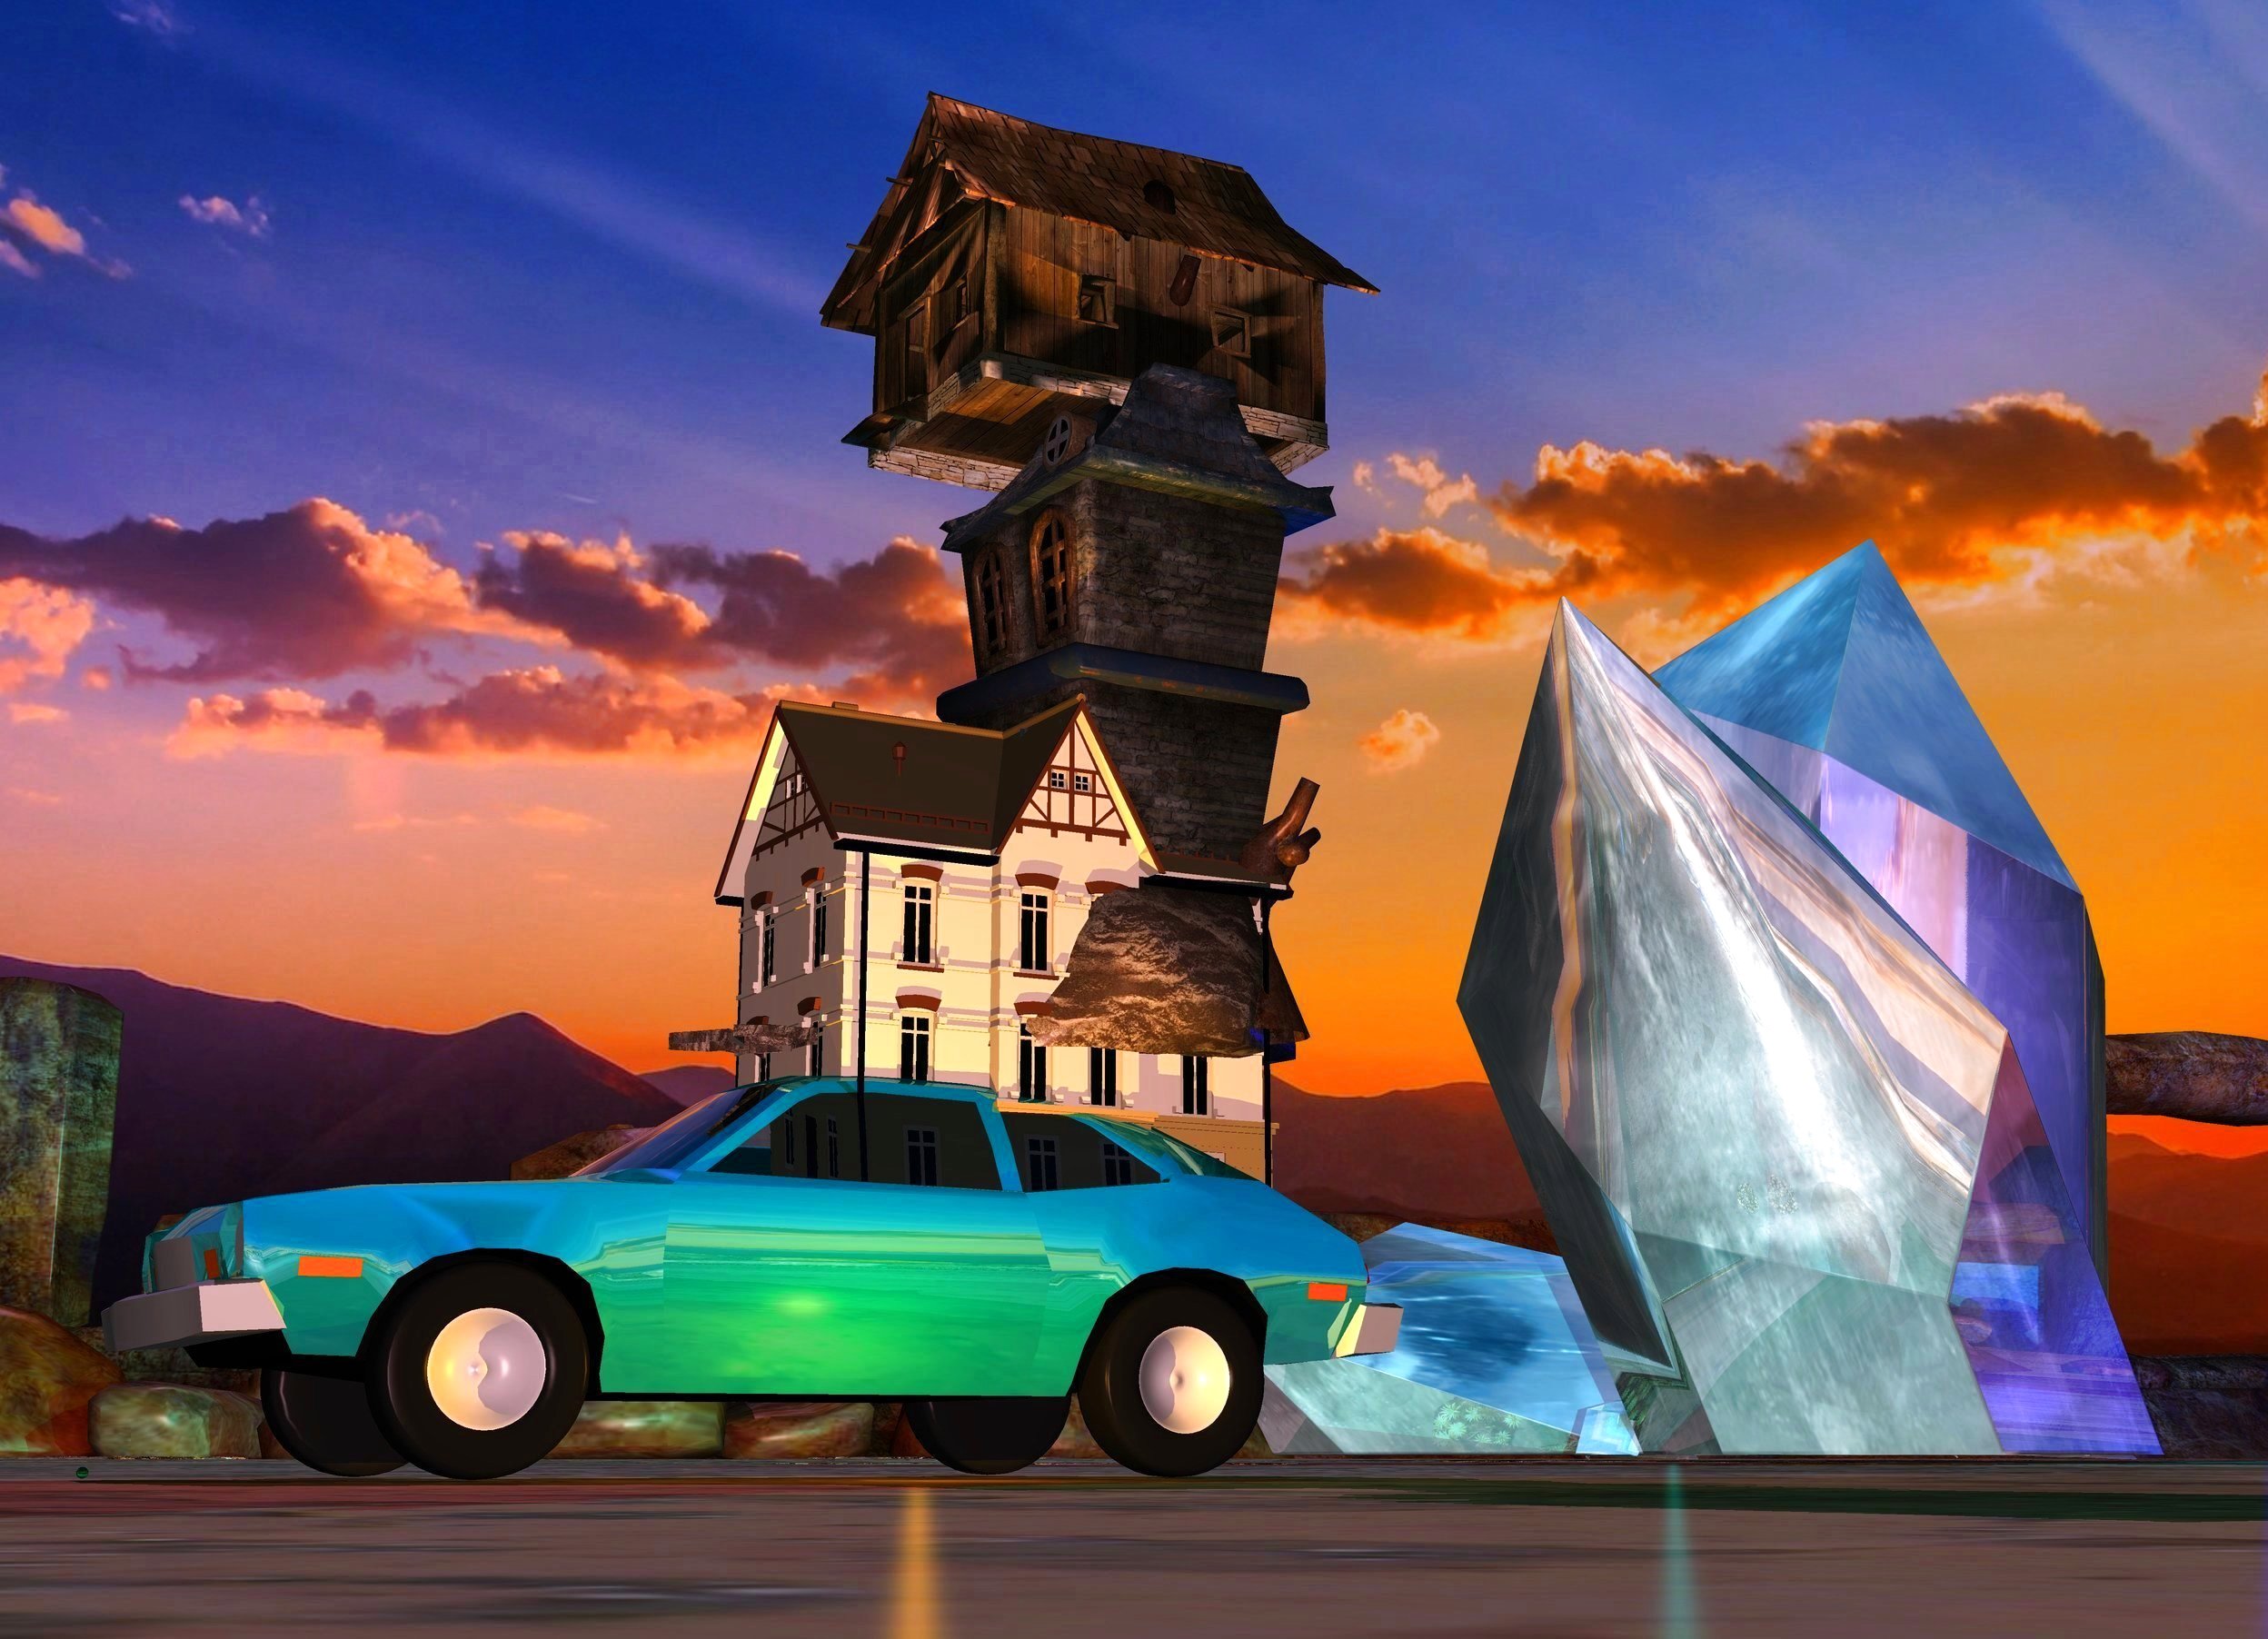 Input text: There is a shiny teal car. there is a marble 1 inch in front of the car. There is a 1st 6 foot tall house. the 1st house is 6 feet behind the marble. the 1st house is 2 feet above the ground. a 2nd 10 foot tall house is 5 feet behind the marble. the 2nd house is 4 feet above the ground. a 3rd house is 7 feet behind the marble. The 3rd house is 4 feet tall. The 3rd house is 11 feet above the ground. there is a shiny teal crystal. the crystal is 50 feet behind the car and 50 feet to the left of the car. the crystal is 50 feet tall.  a very large blue light is to the right of the crystal. A 1st very large teal light is above the crystal. a 2nd very large teal light is to the right and in front of the crystal. the sun is lavender. the camera light is pink. there is a large orange light to the right of the car.